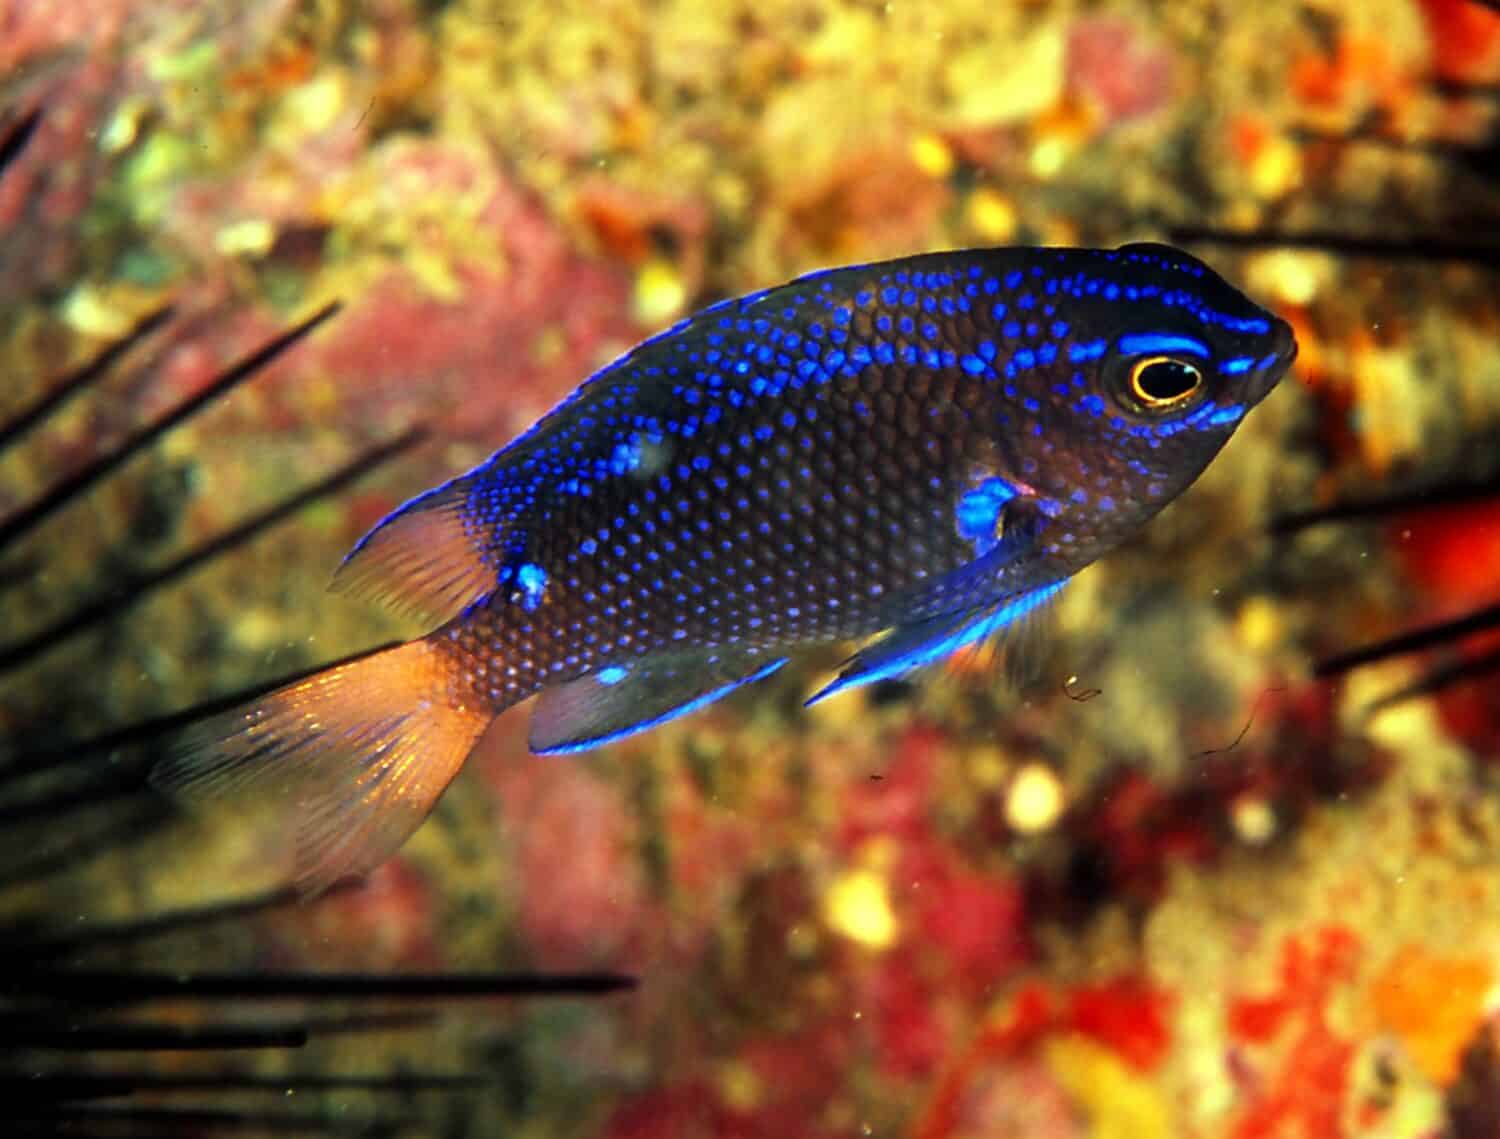 juvenile blue-fin damselfish (also known as canary damselfish) defends its territory on reef wall